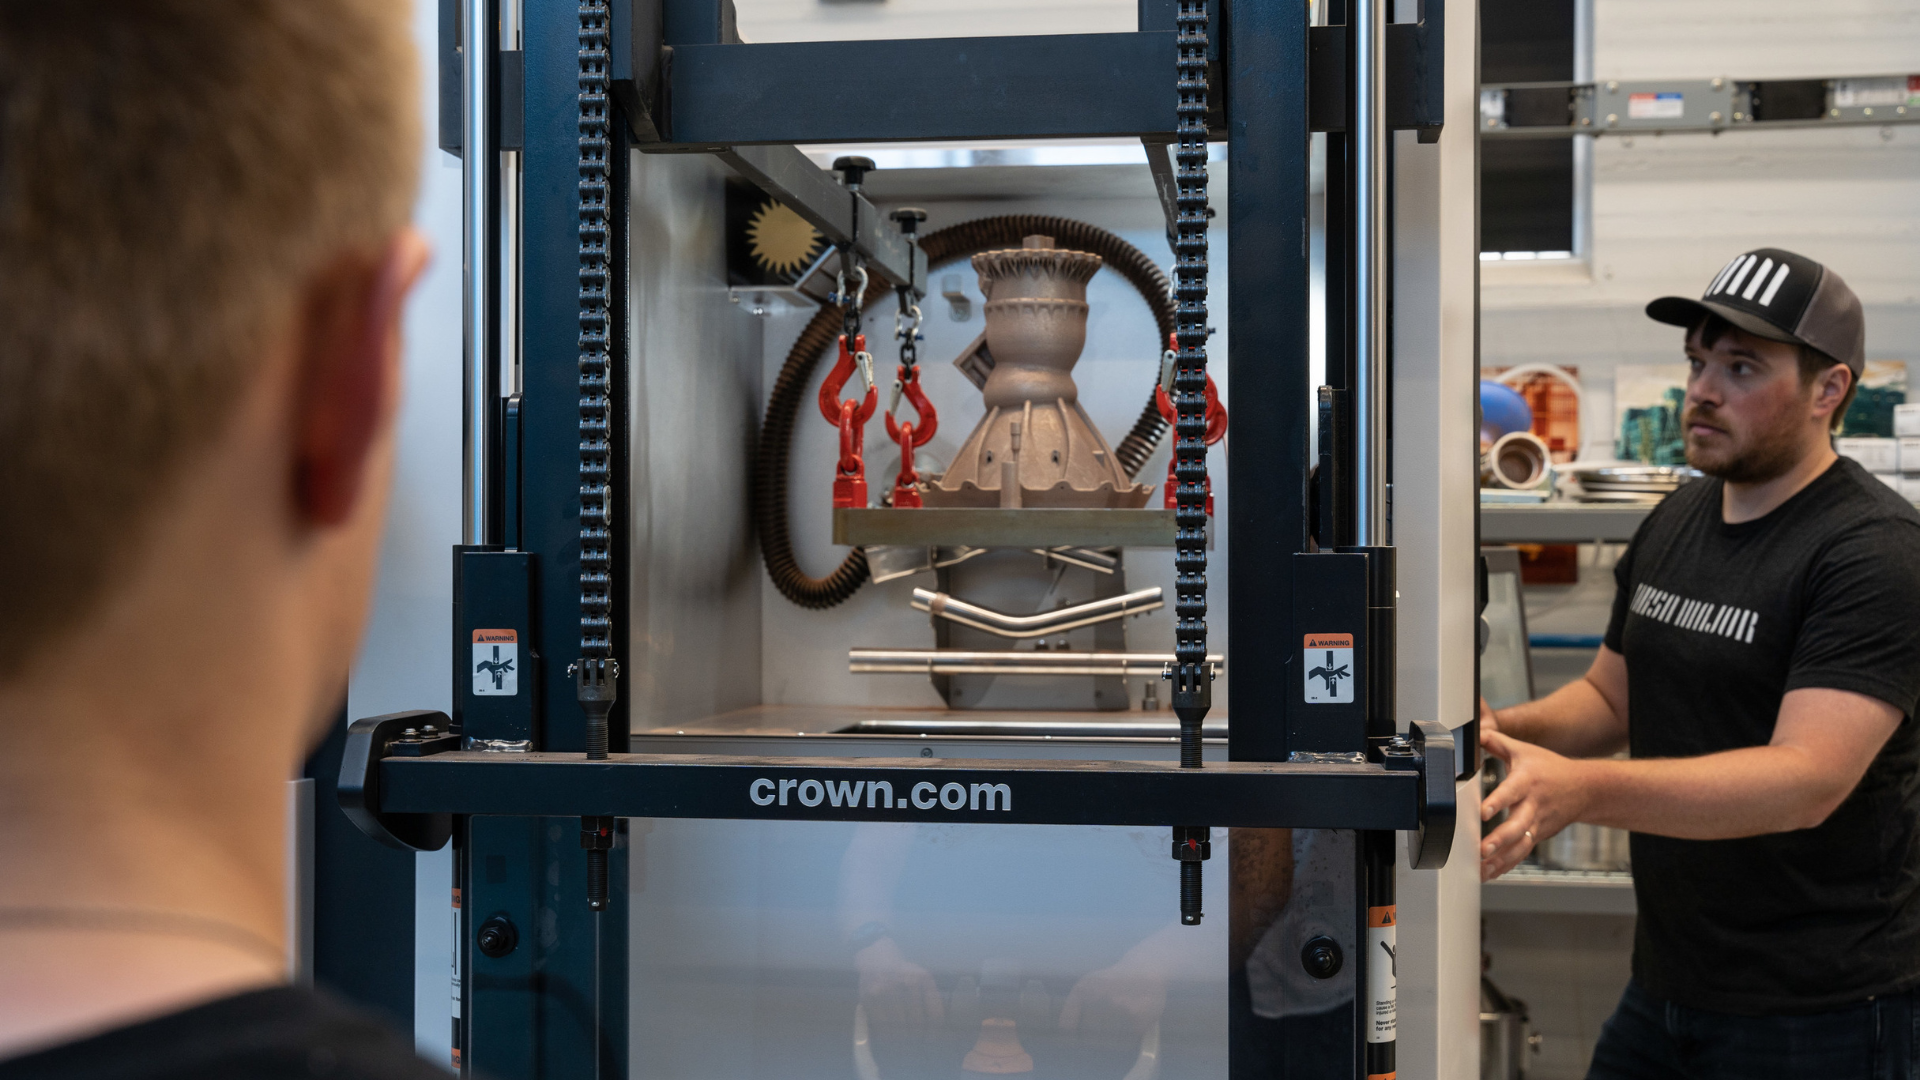 Ursa Major delivered its first copper-based 3D-printed rocket propulsion combustion chambers out of its additive manufacturing lab in Youngstown, Ohio.